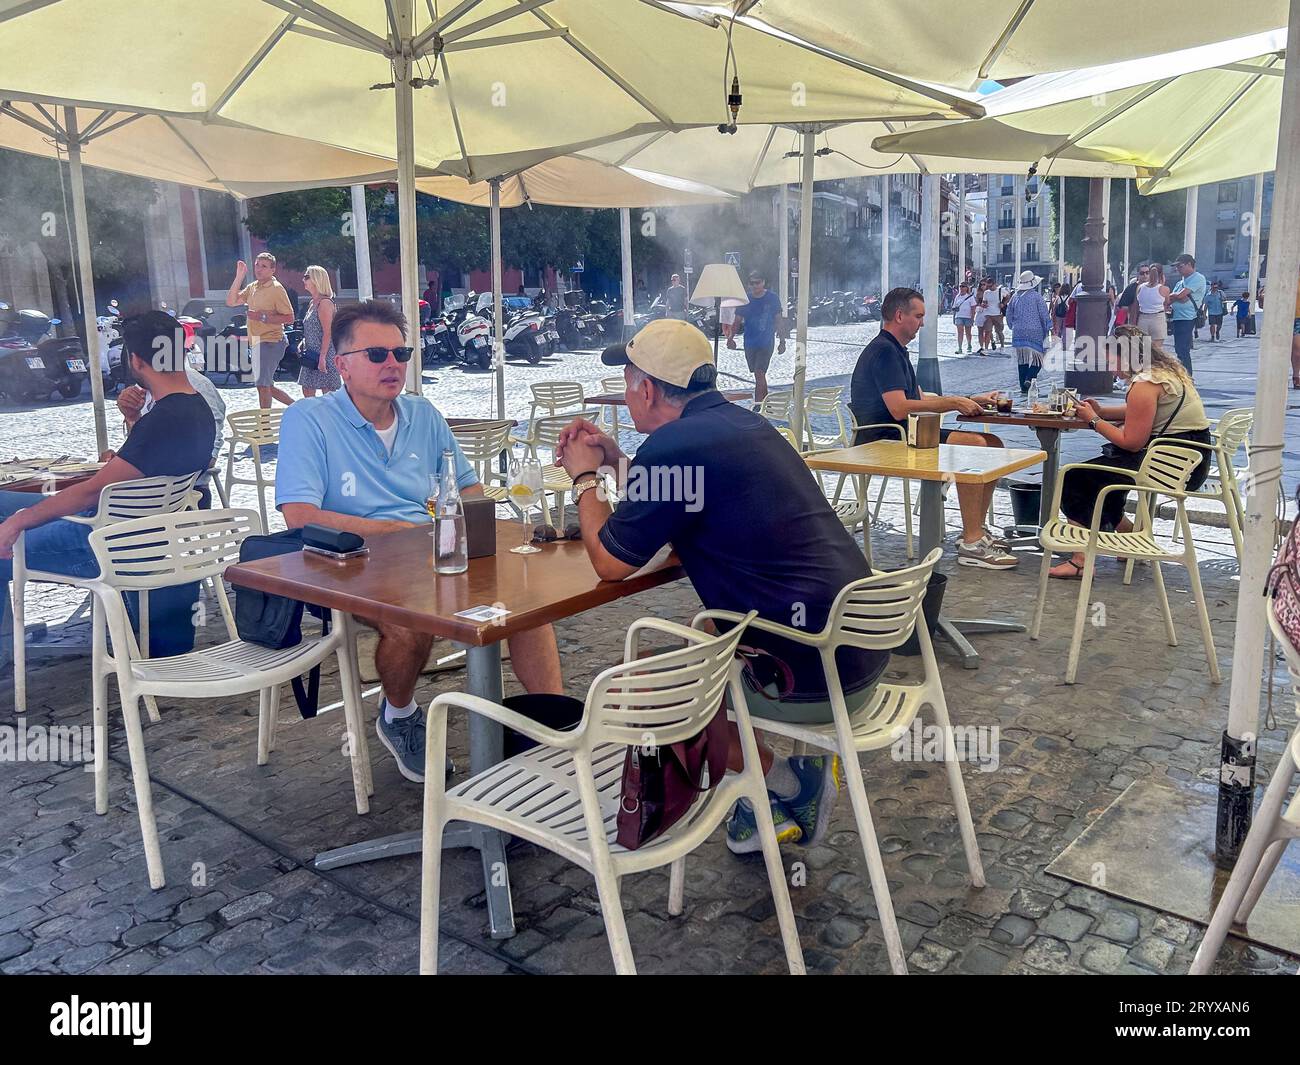 Seville, Spain, Small Group People, Men,  Sharing Drinks on Cafe Terrace with Water mist to Cool, on Hot Day, on Street Scene, in Old Town Center, neighborhoods Stock Photo